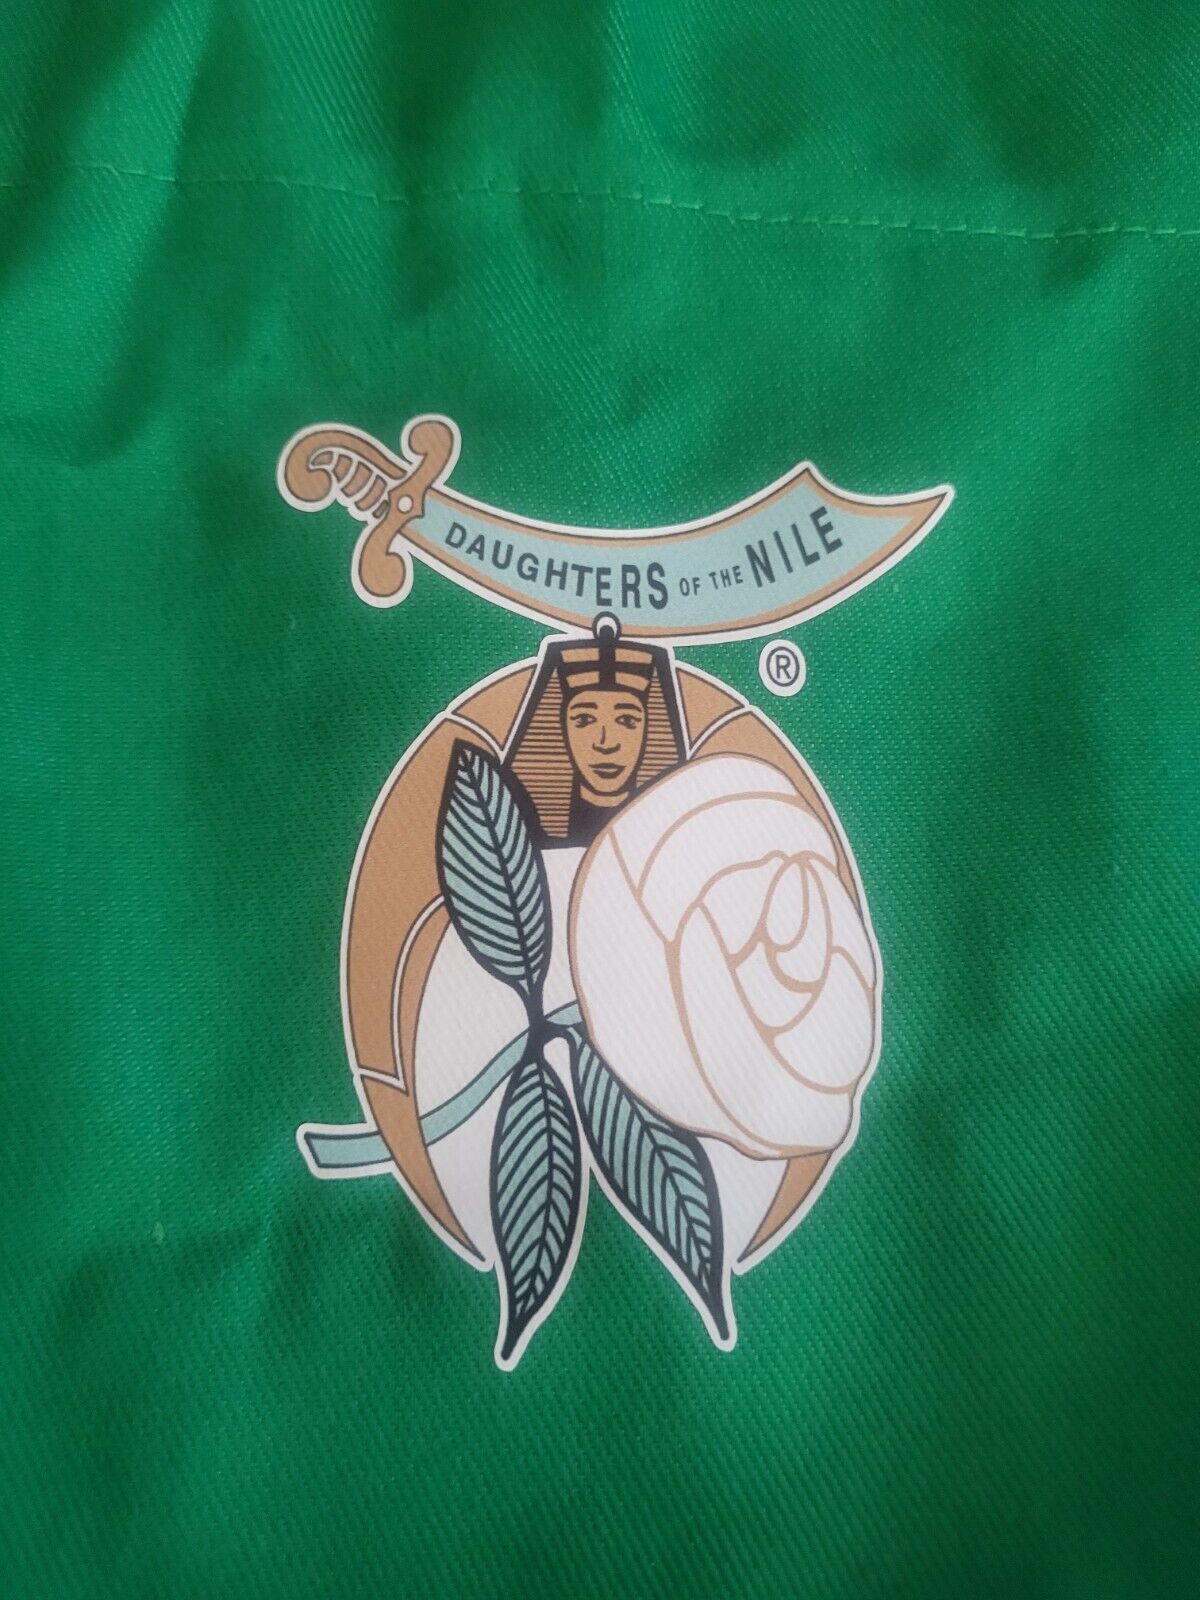 Daughters of the Nile Black or Green Apron